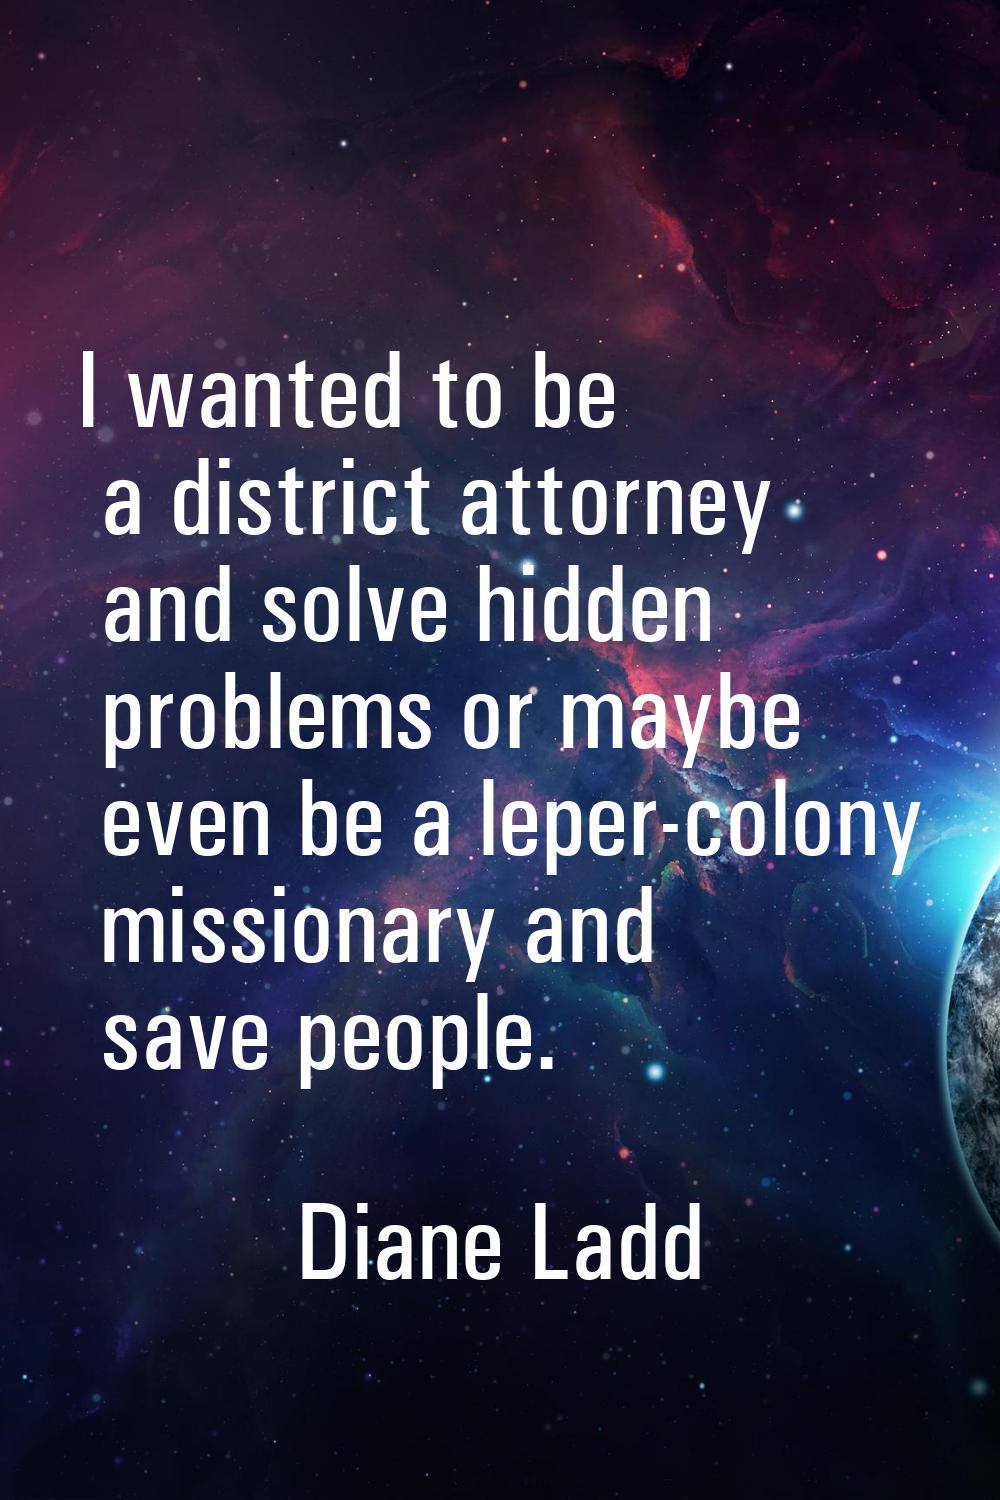 I wanted to be a district attorney and solve hidden problems or maybe even be a leper-colony missio